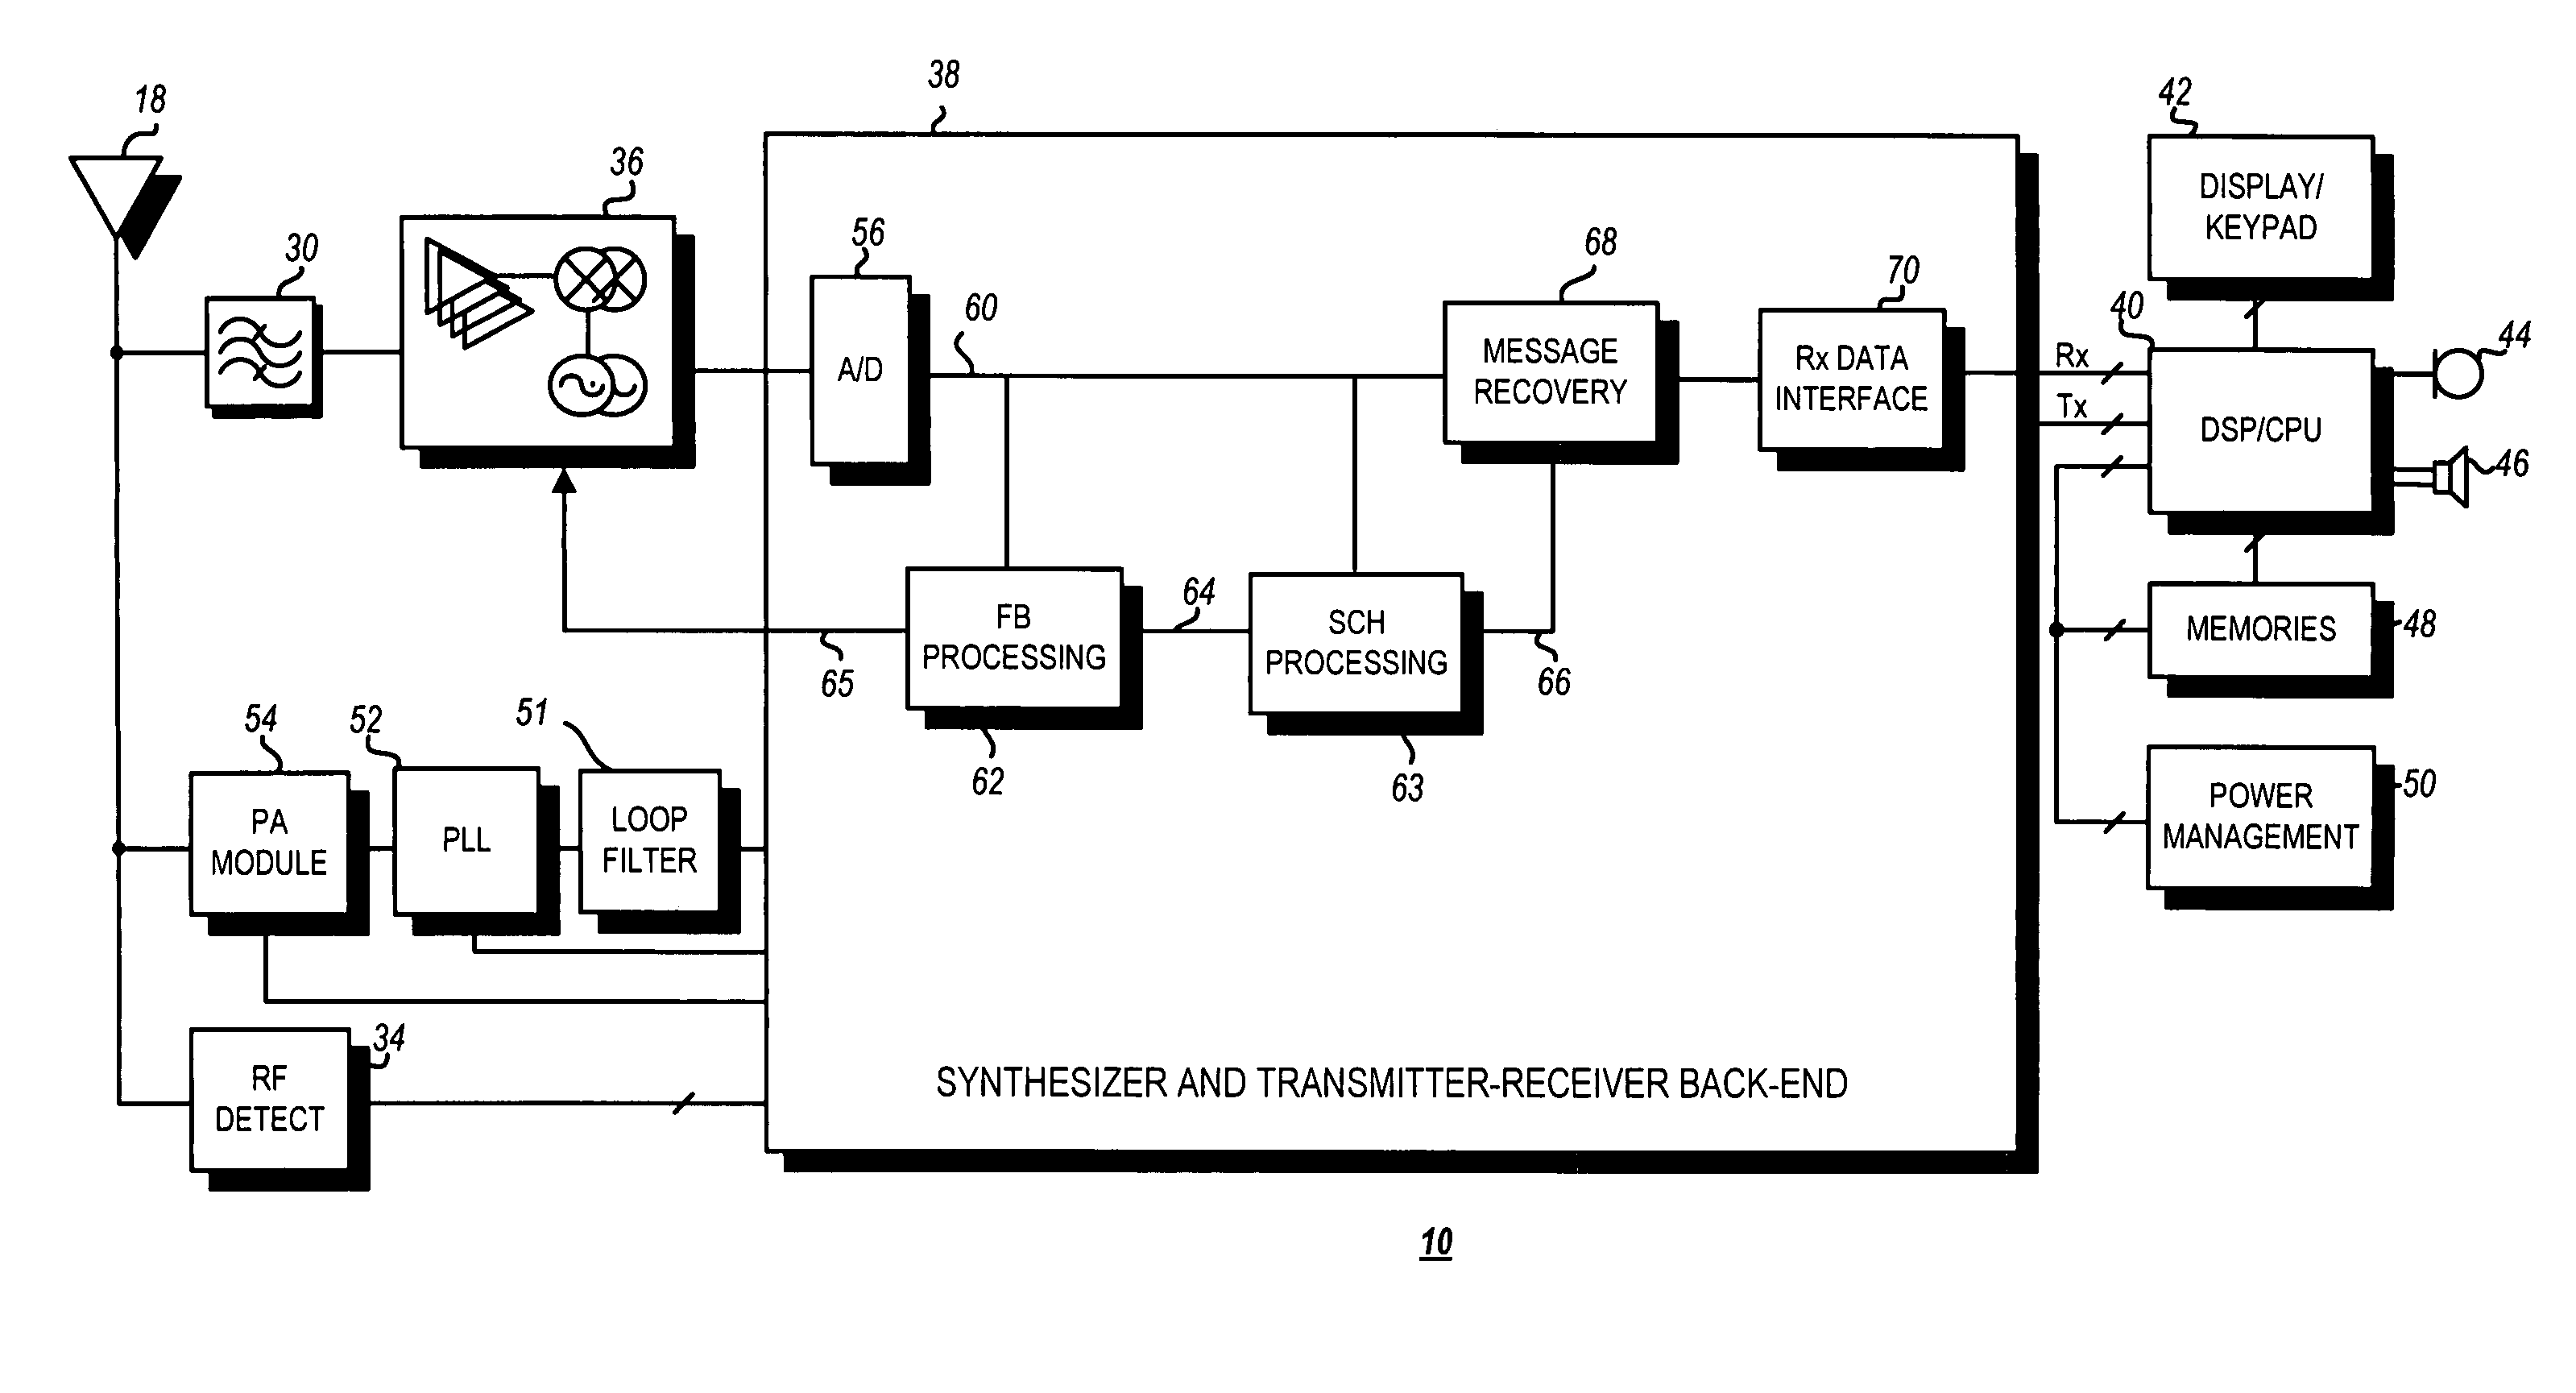 Frequency correction channel burst detector in a GSM/EDGE communication system